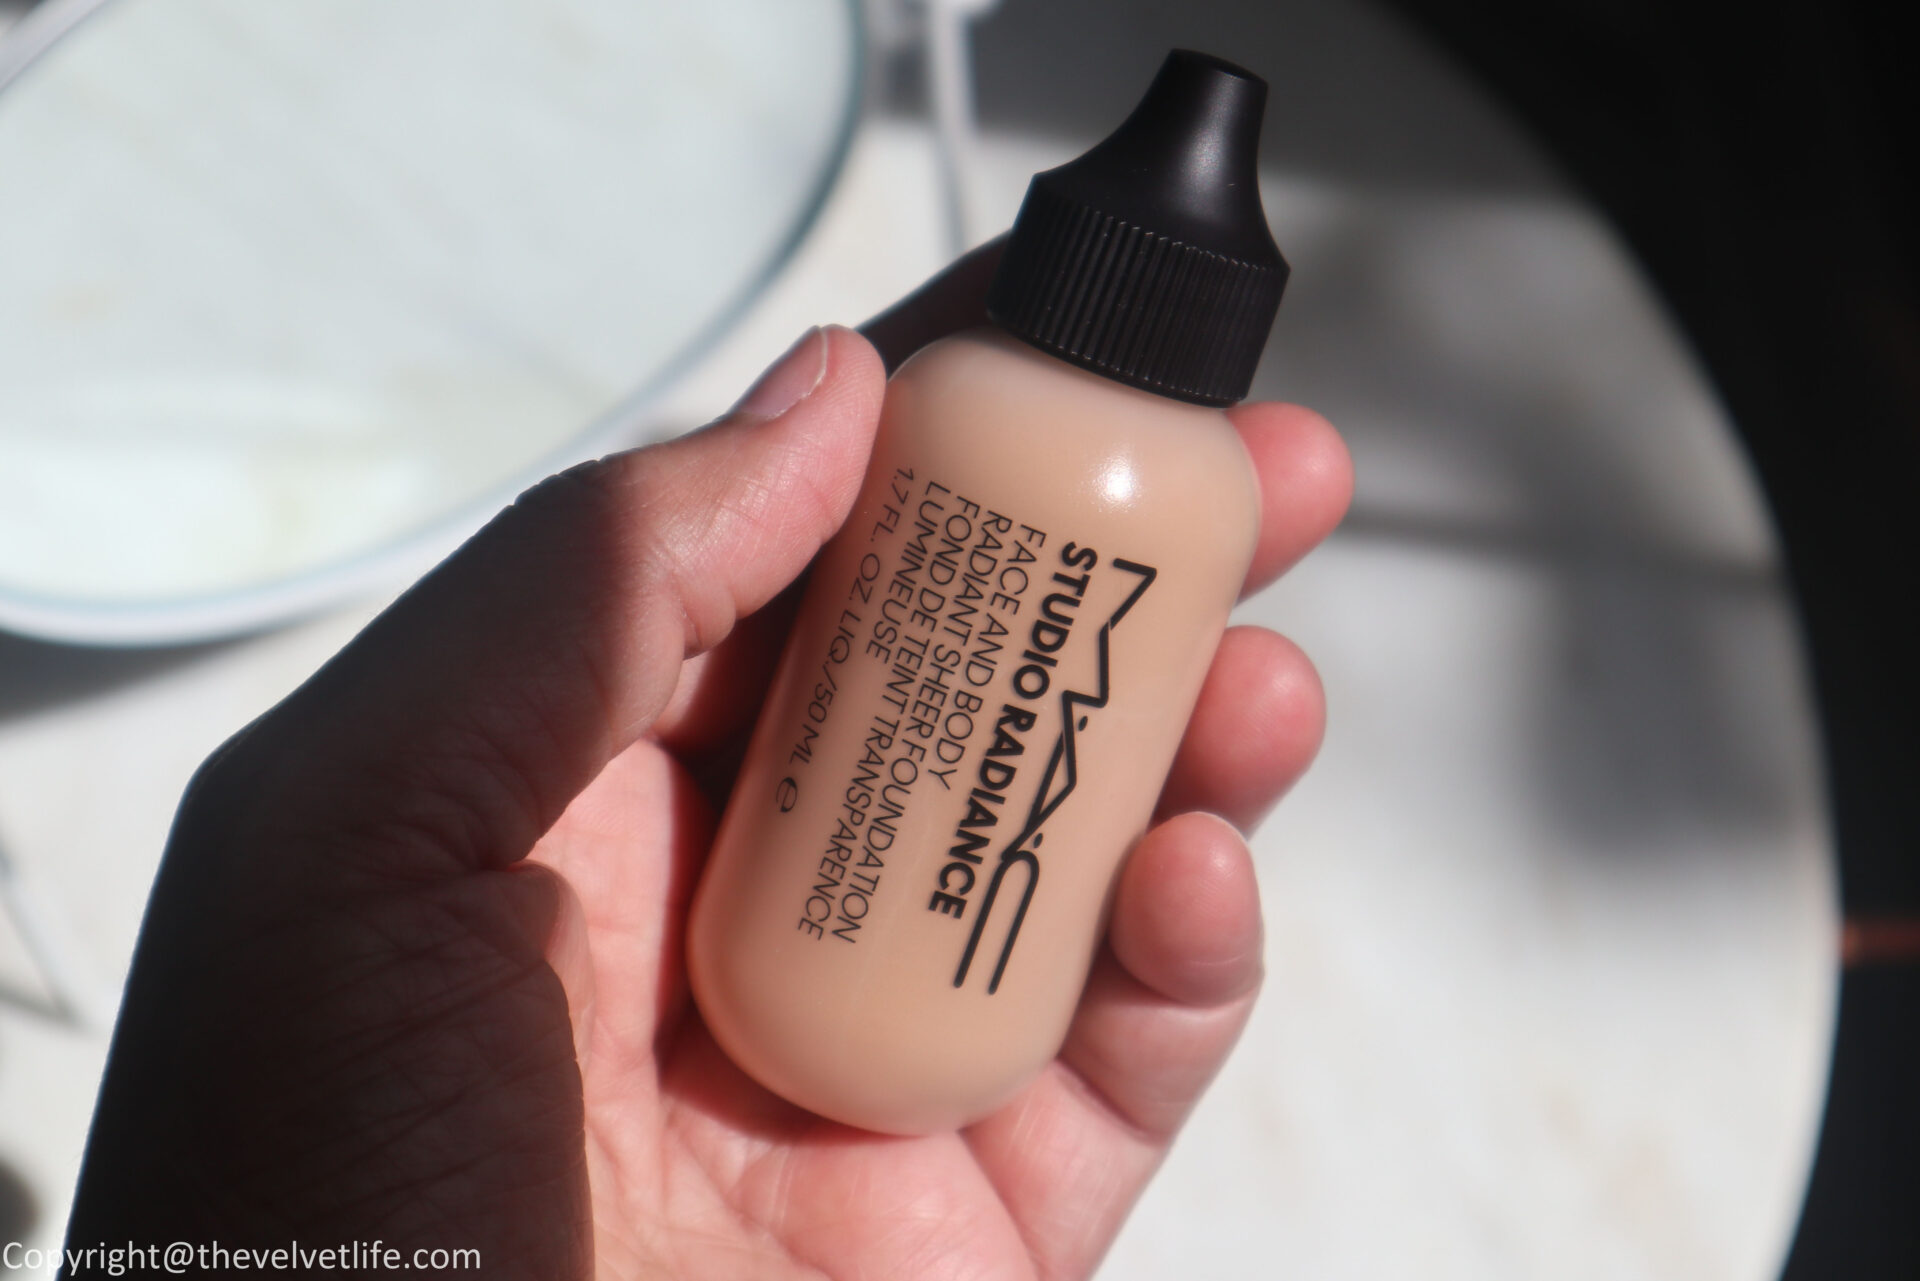 mac face and body shades foundation n2